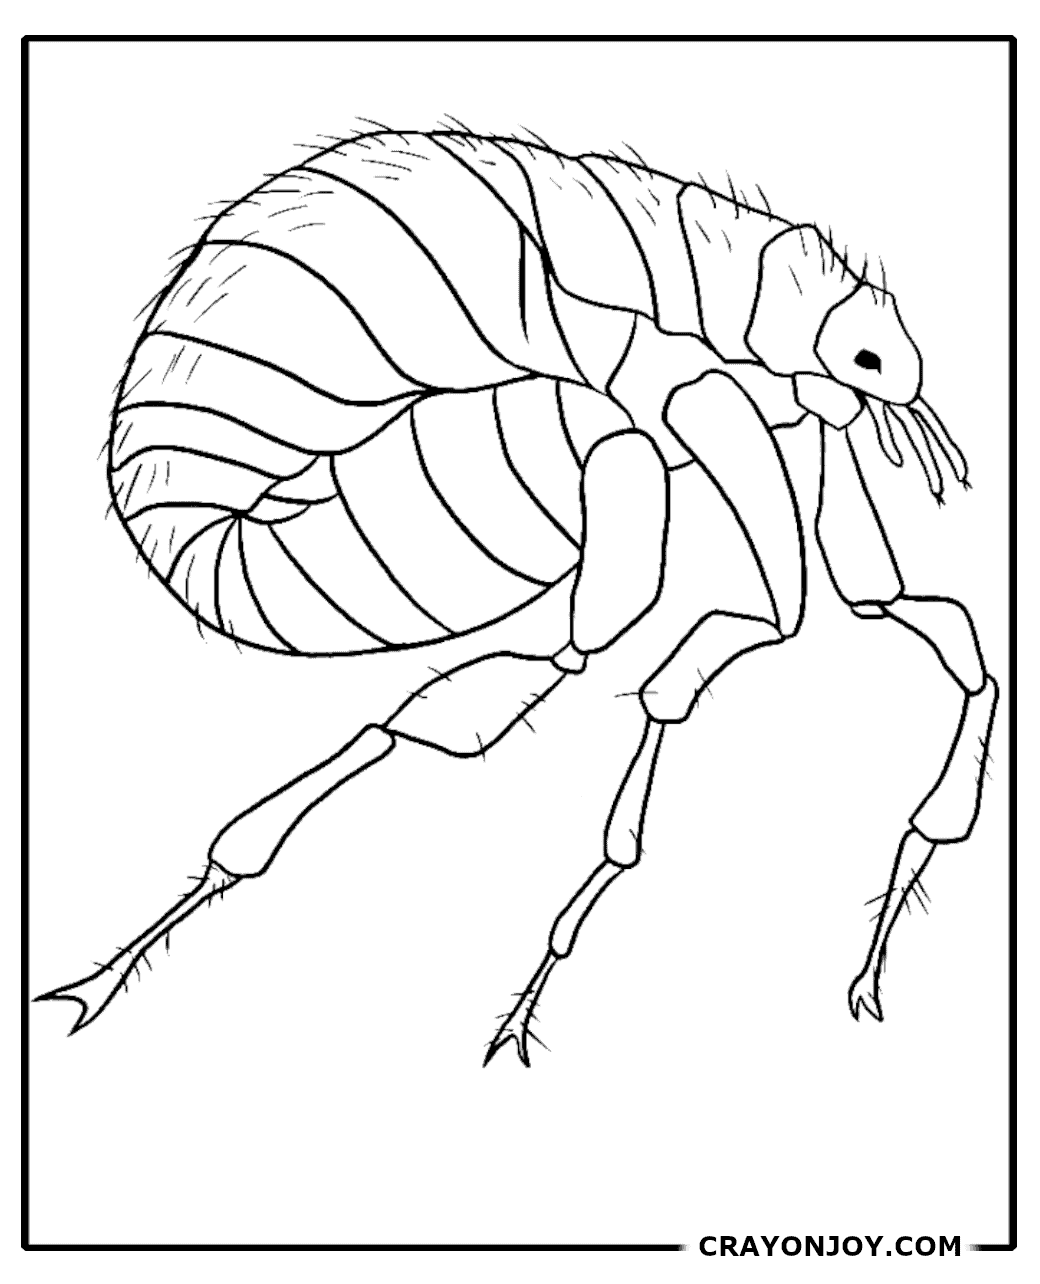 Free Printable Flea Coloring Pages for Kids & Adults